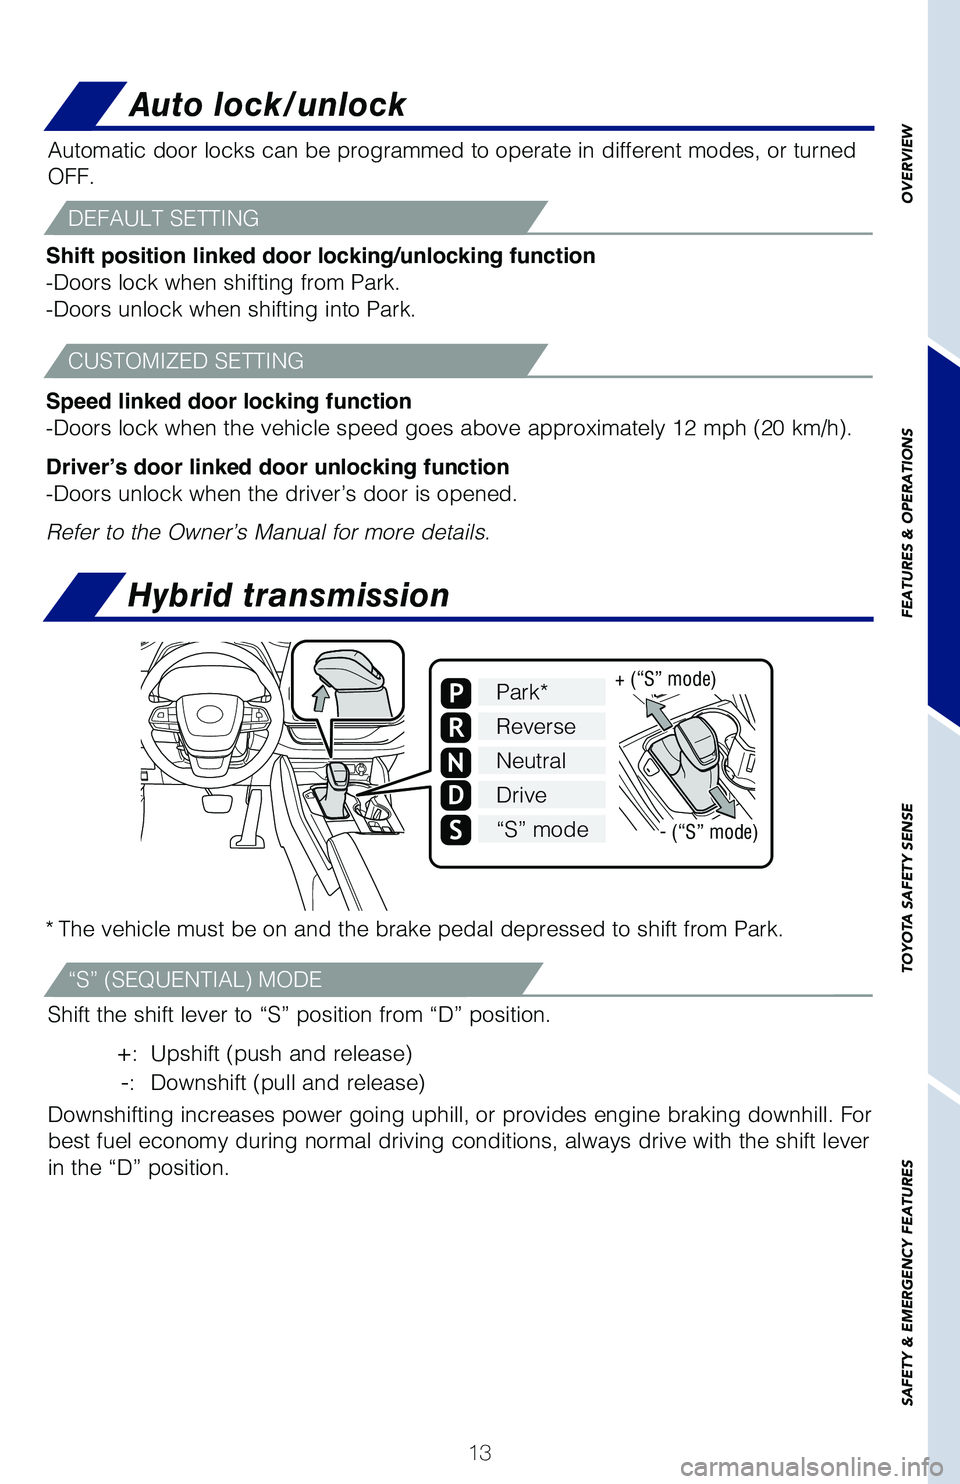 TOYOTA HIGHLANDER HYBRID 2021  Owners Manual (in English) 13
OVERVIEW
FEATURES & OPERATIONS
TOYOTA SAFETY SENSE
SAFETY & EMERGENCY FEATURES
* The vehicle must be on and the brake pedal depressed to shift from Park.\�
Shift the shift lever to “S” positi